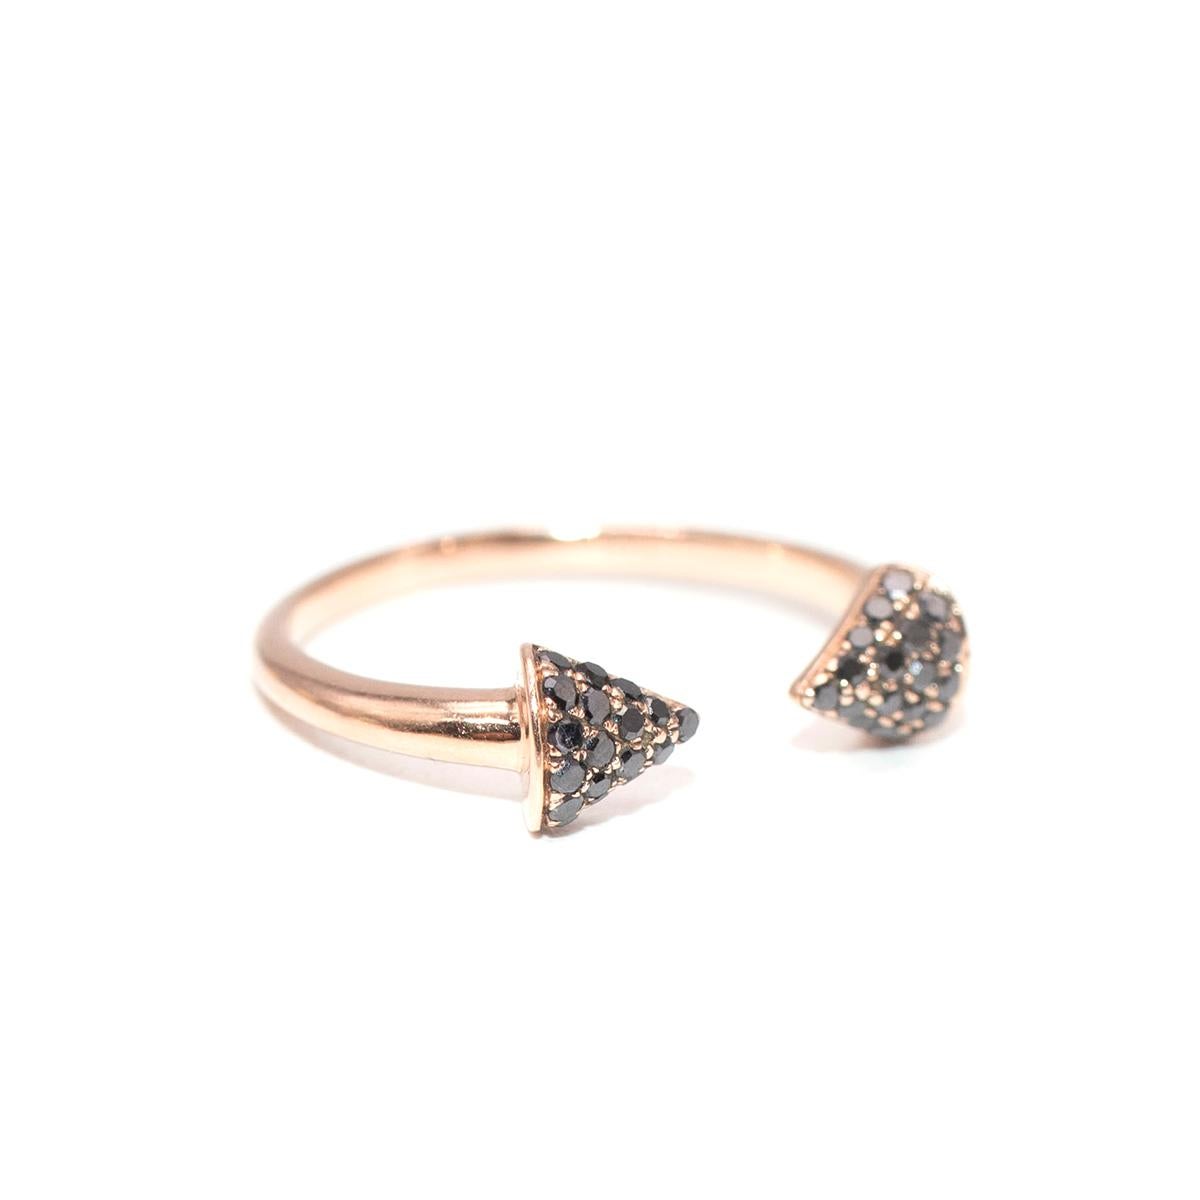 Bespoke 14ct Rose Gold & Black Diamond Pave Arrow Head Ring 7 In New Condition For Sale In London, GB